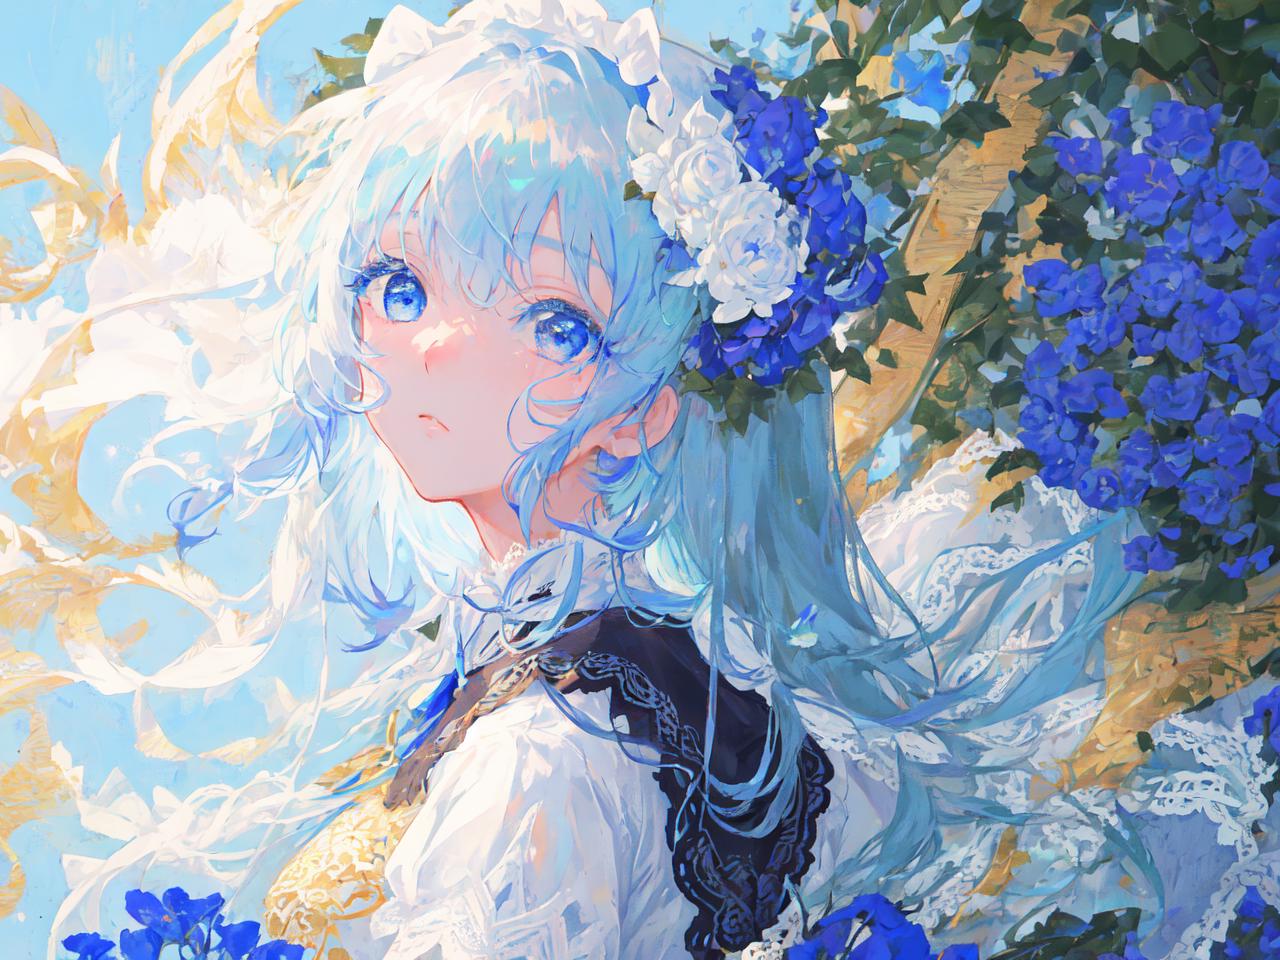 A beautiful young woman with blue eyes, white hair, and a blue flower in her hair.